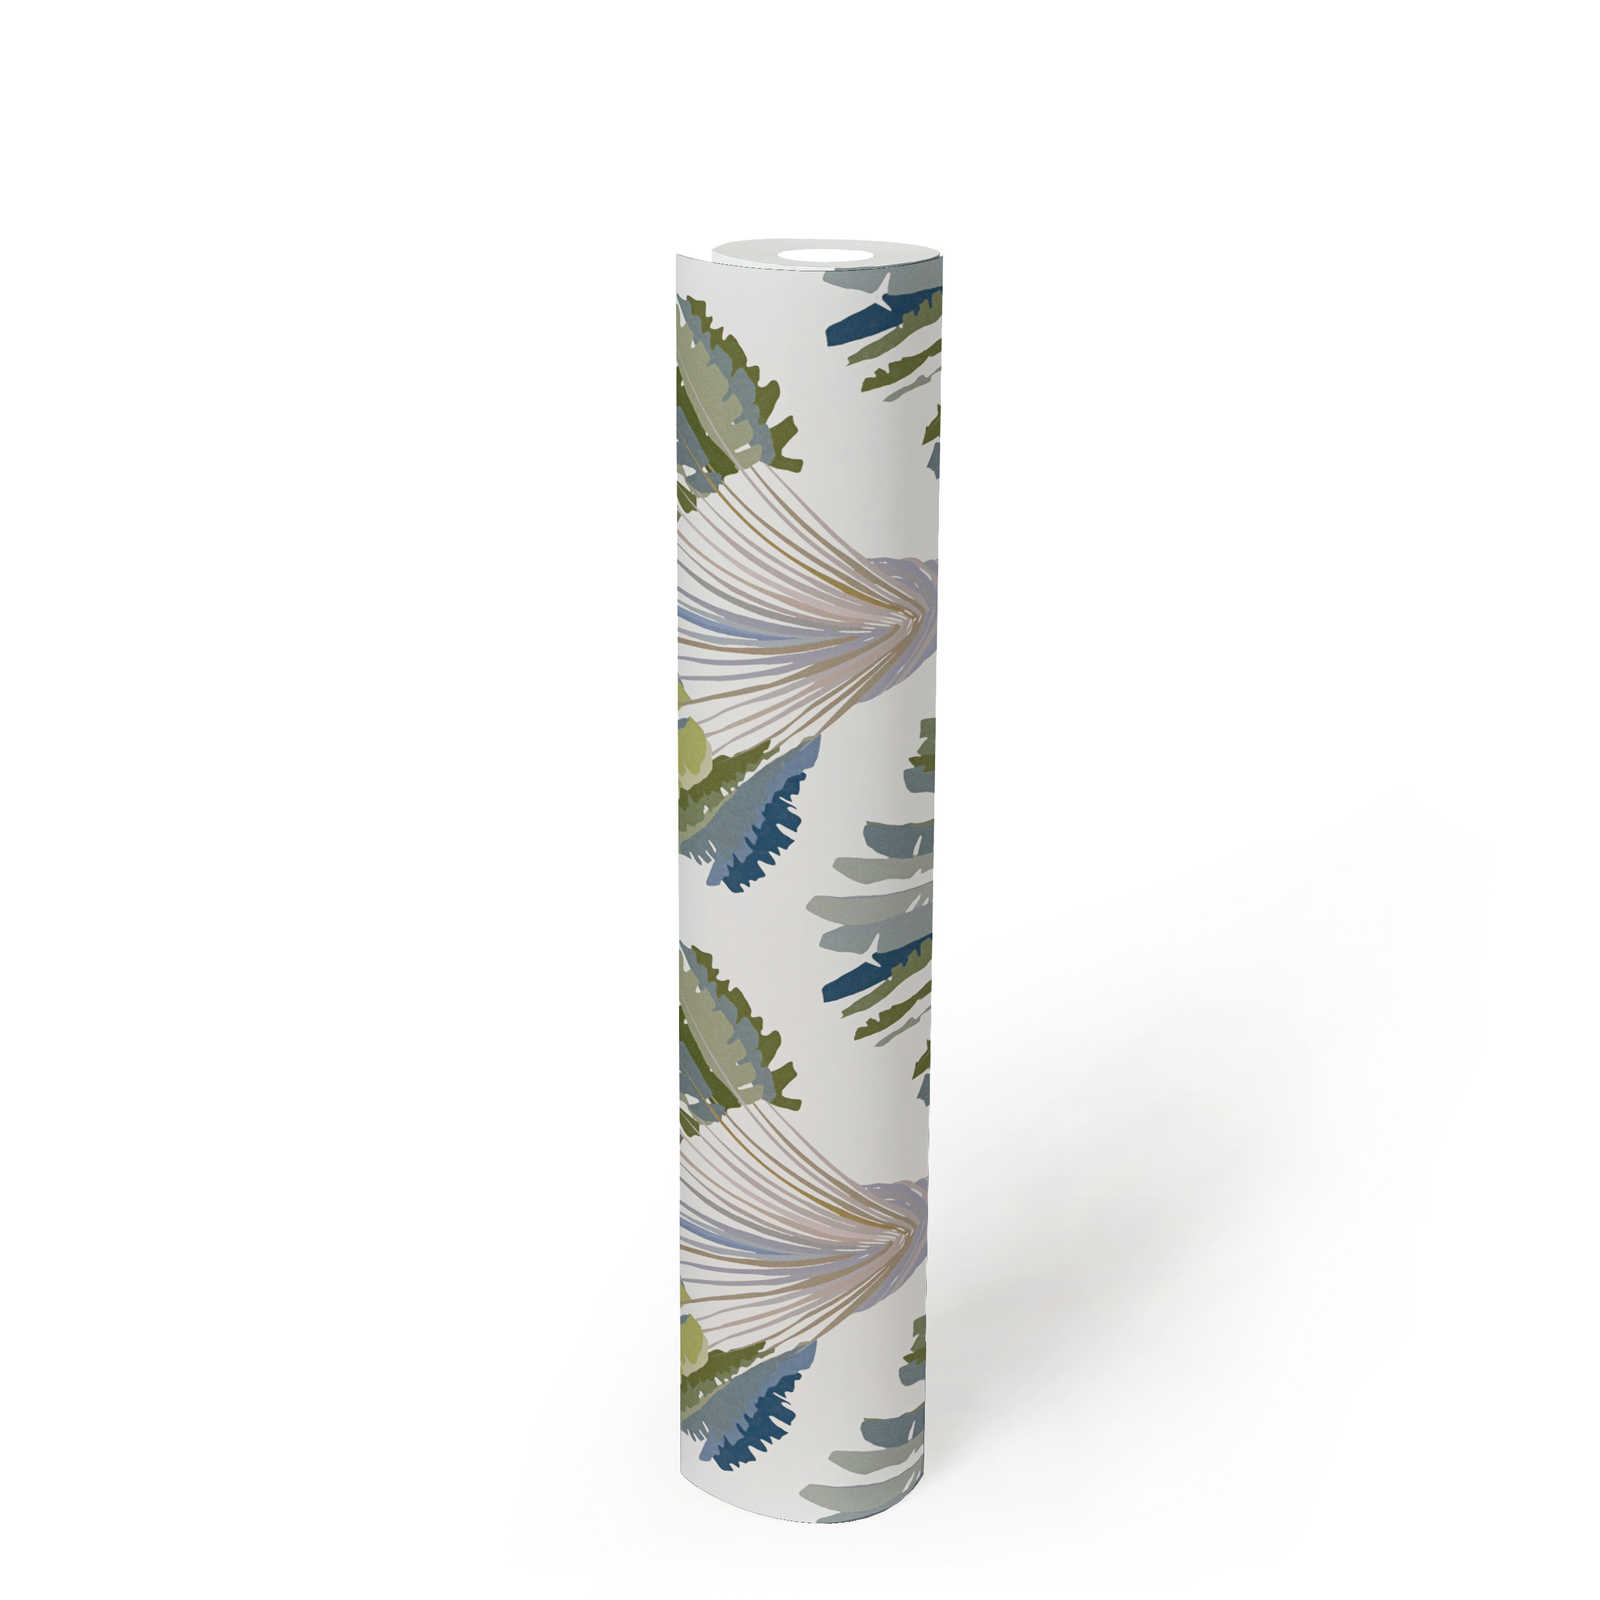             Wallpaper palm leaves & perennials in abstract pattern - green, white, blue
        